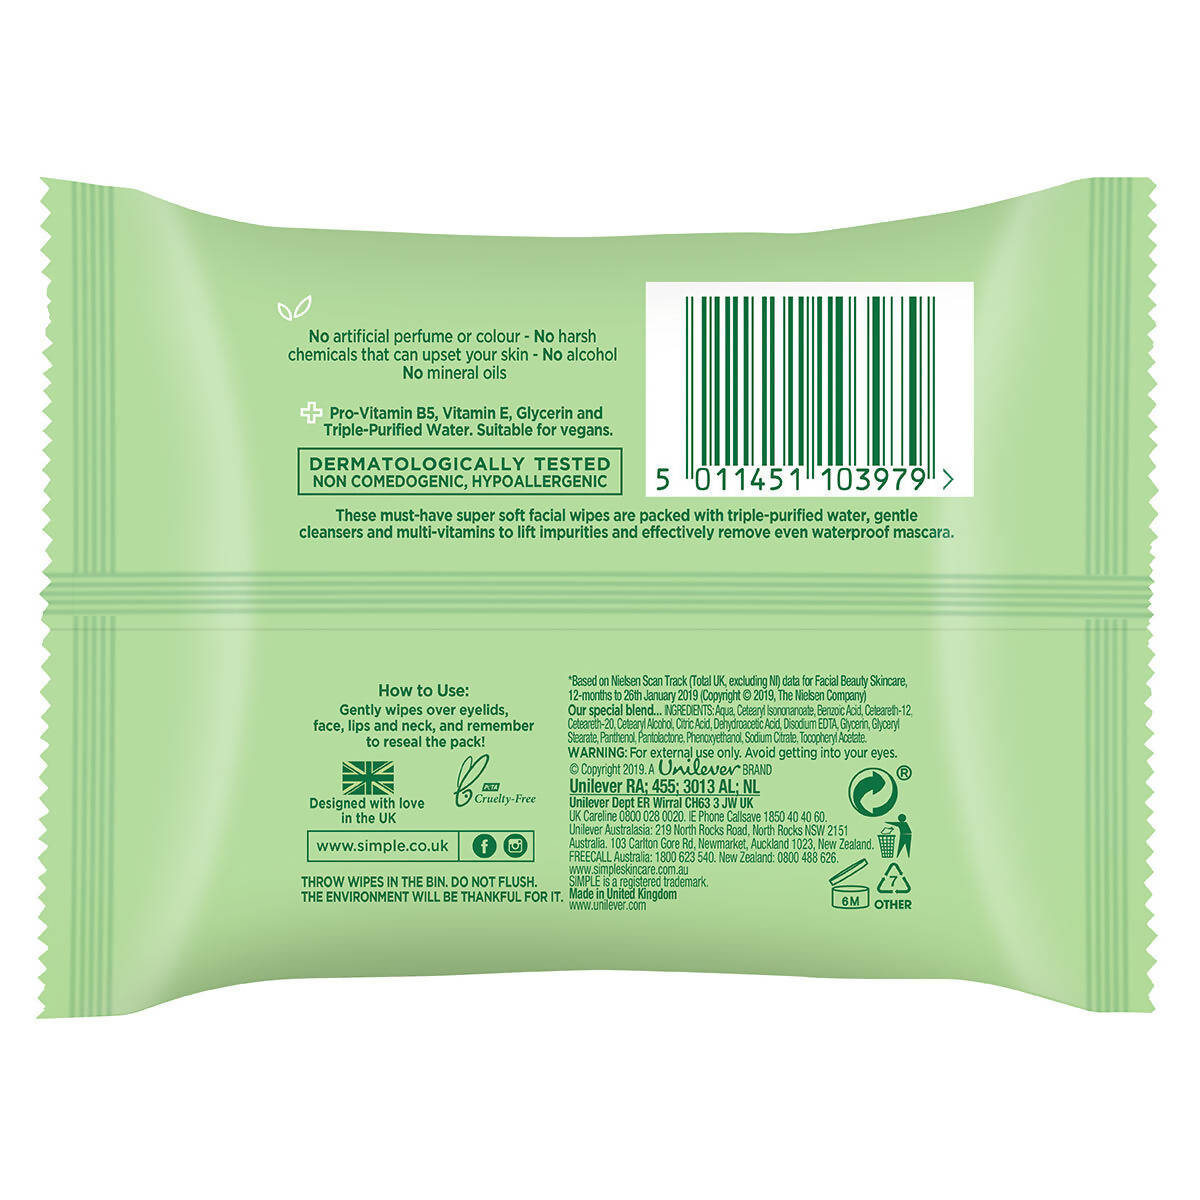 Simple Cleansing Facial Wipes, 6 x 25 Pack Skin Care Costco UK   